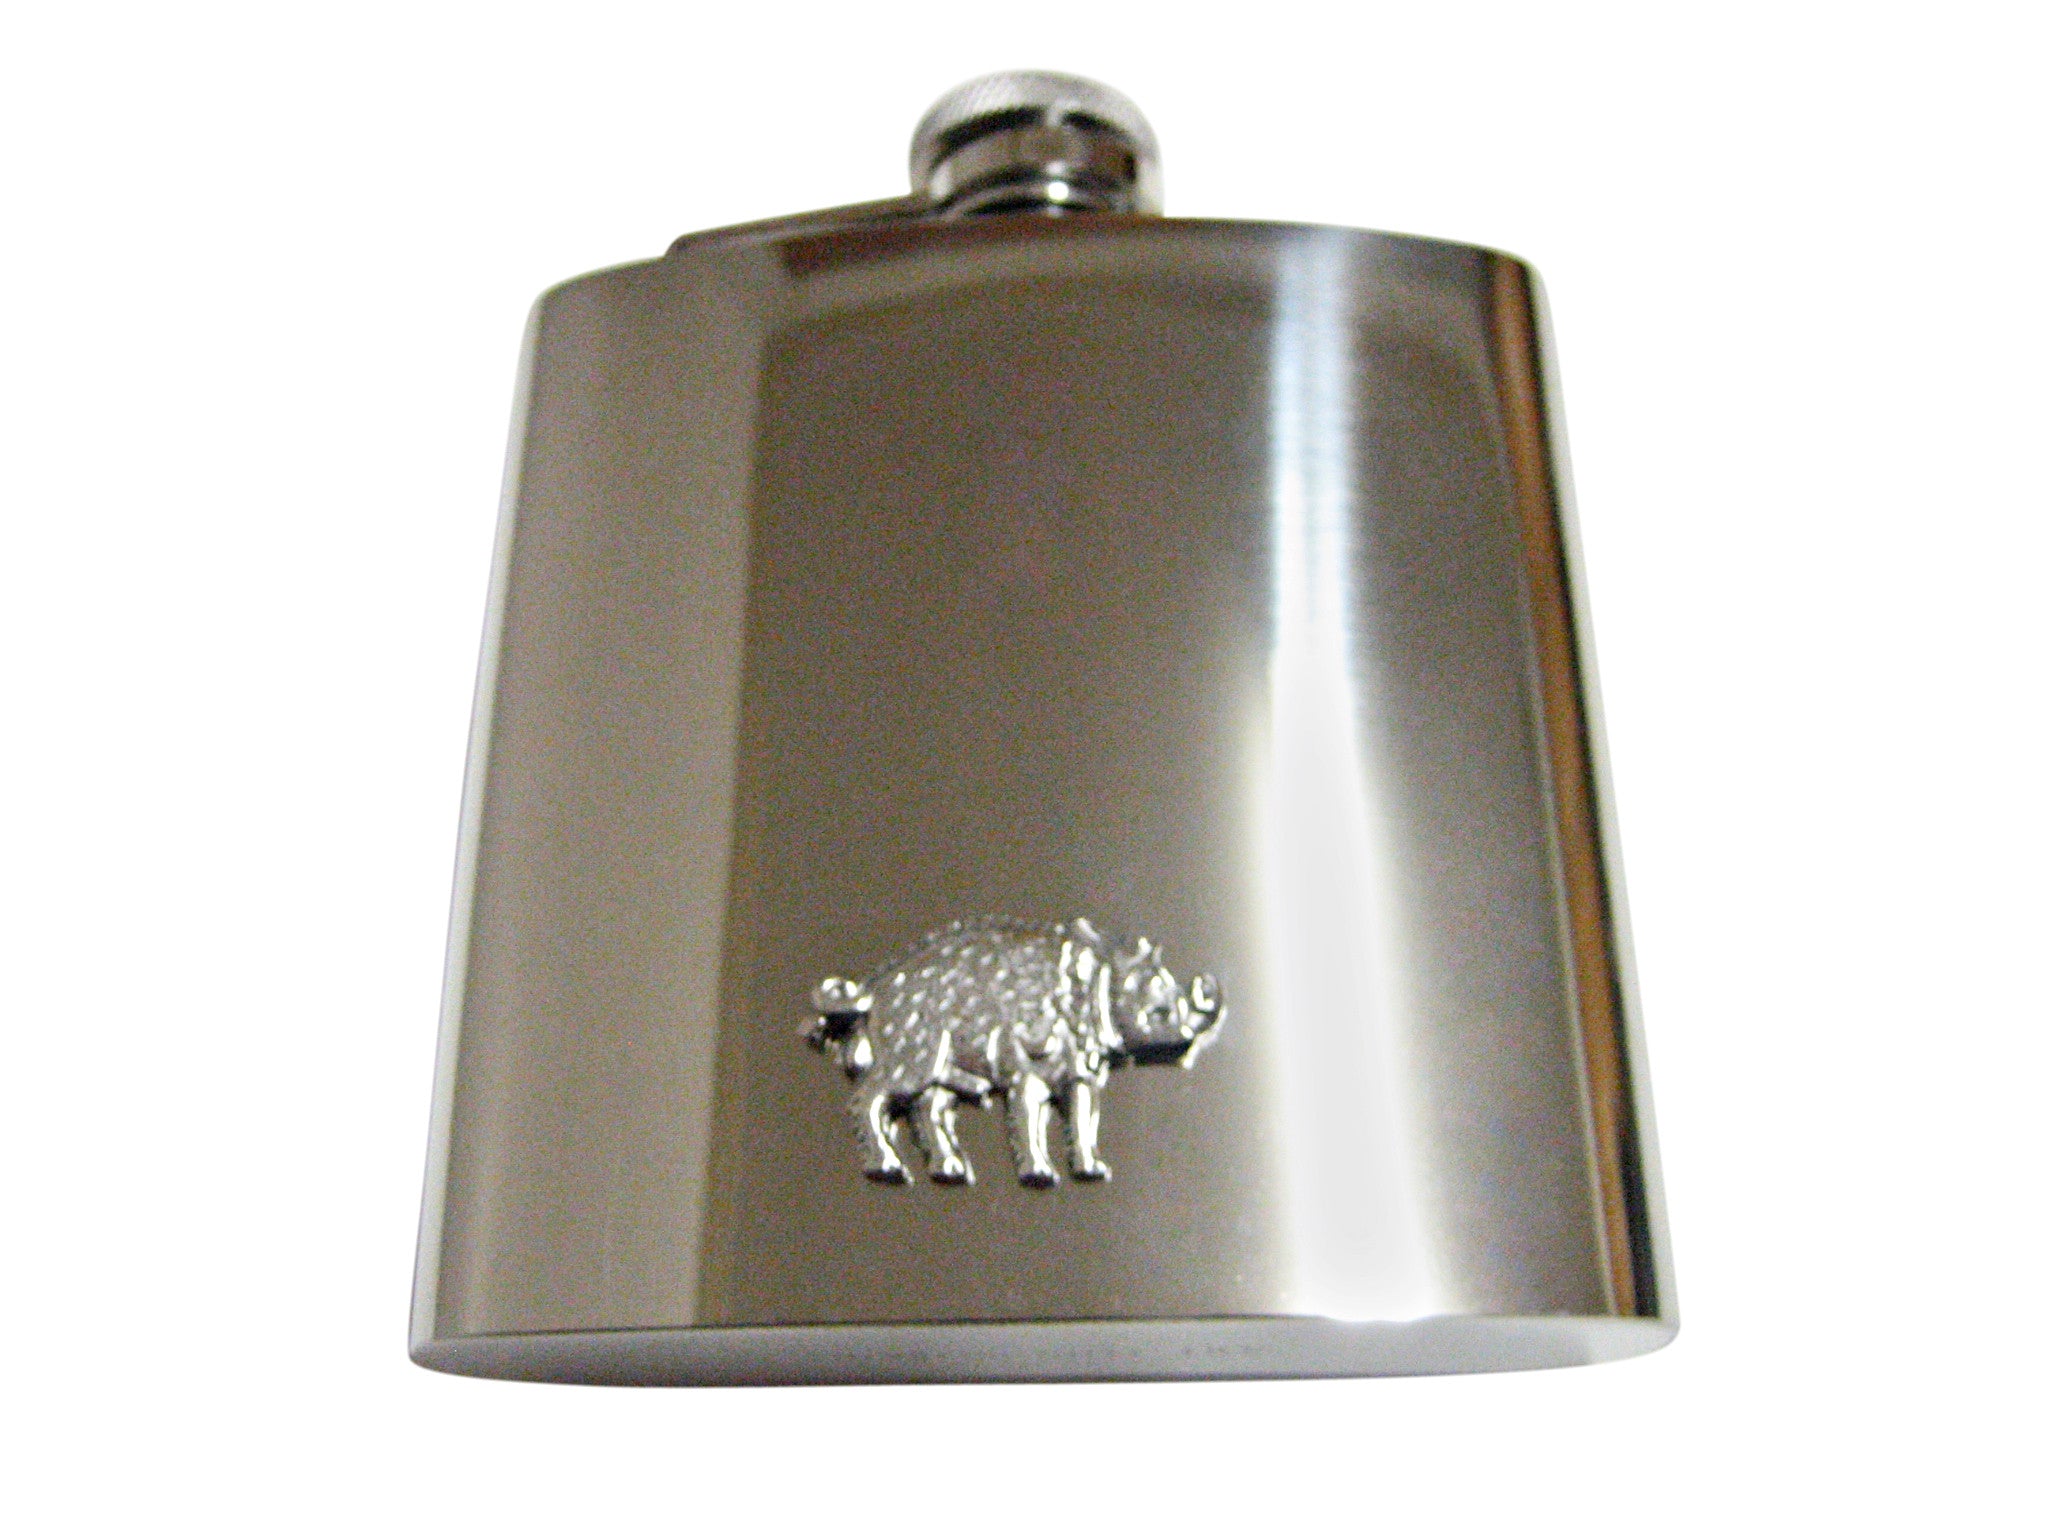 Textured Pig 6 Oz. Stainless Steel Flask